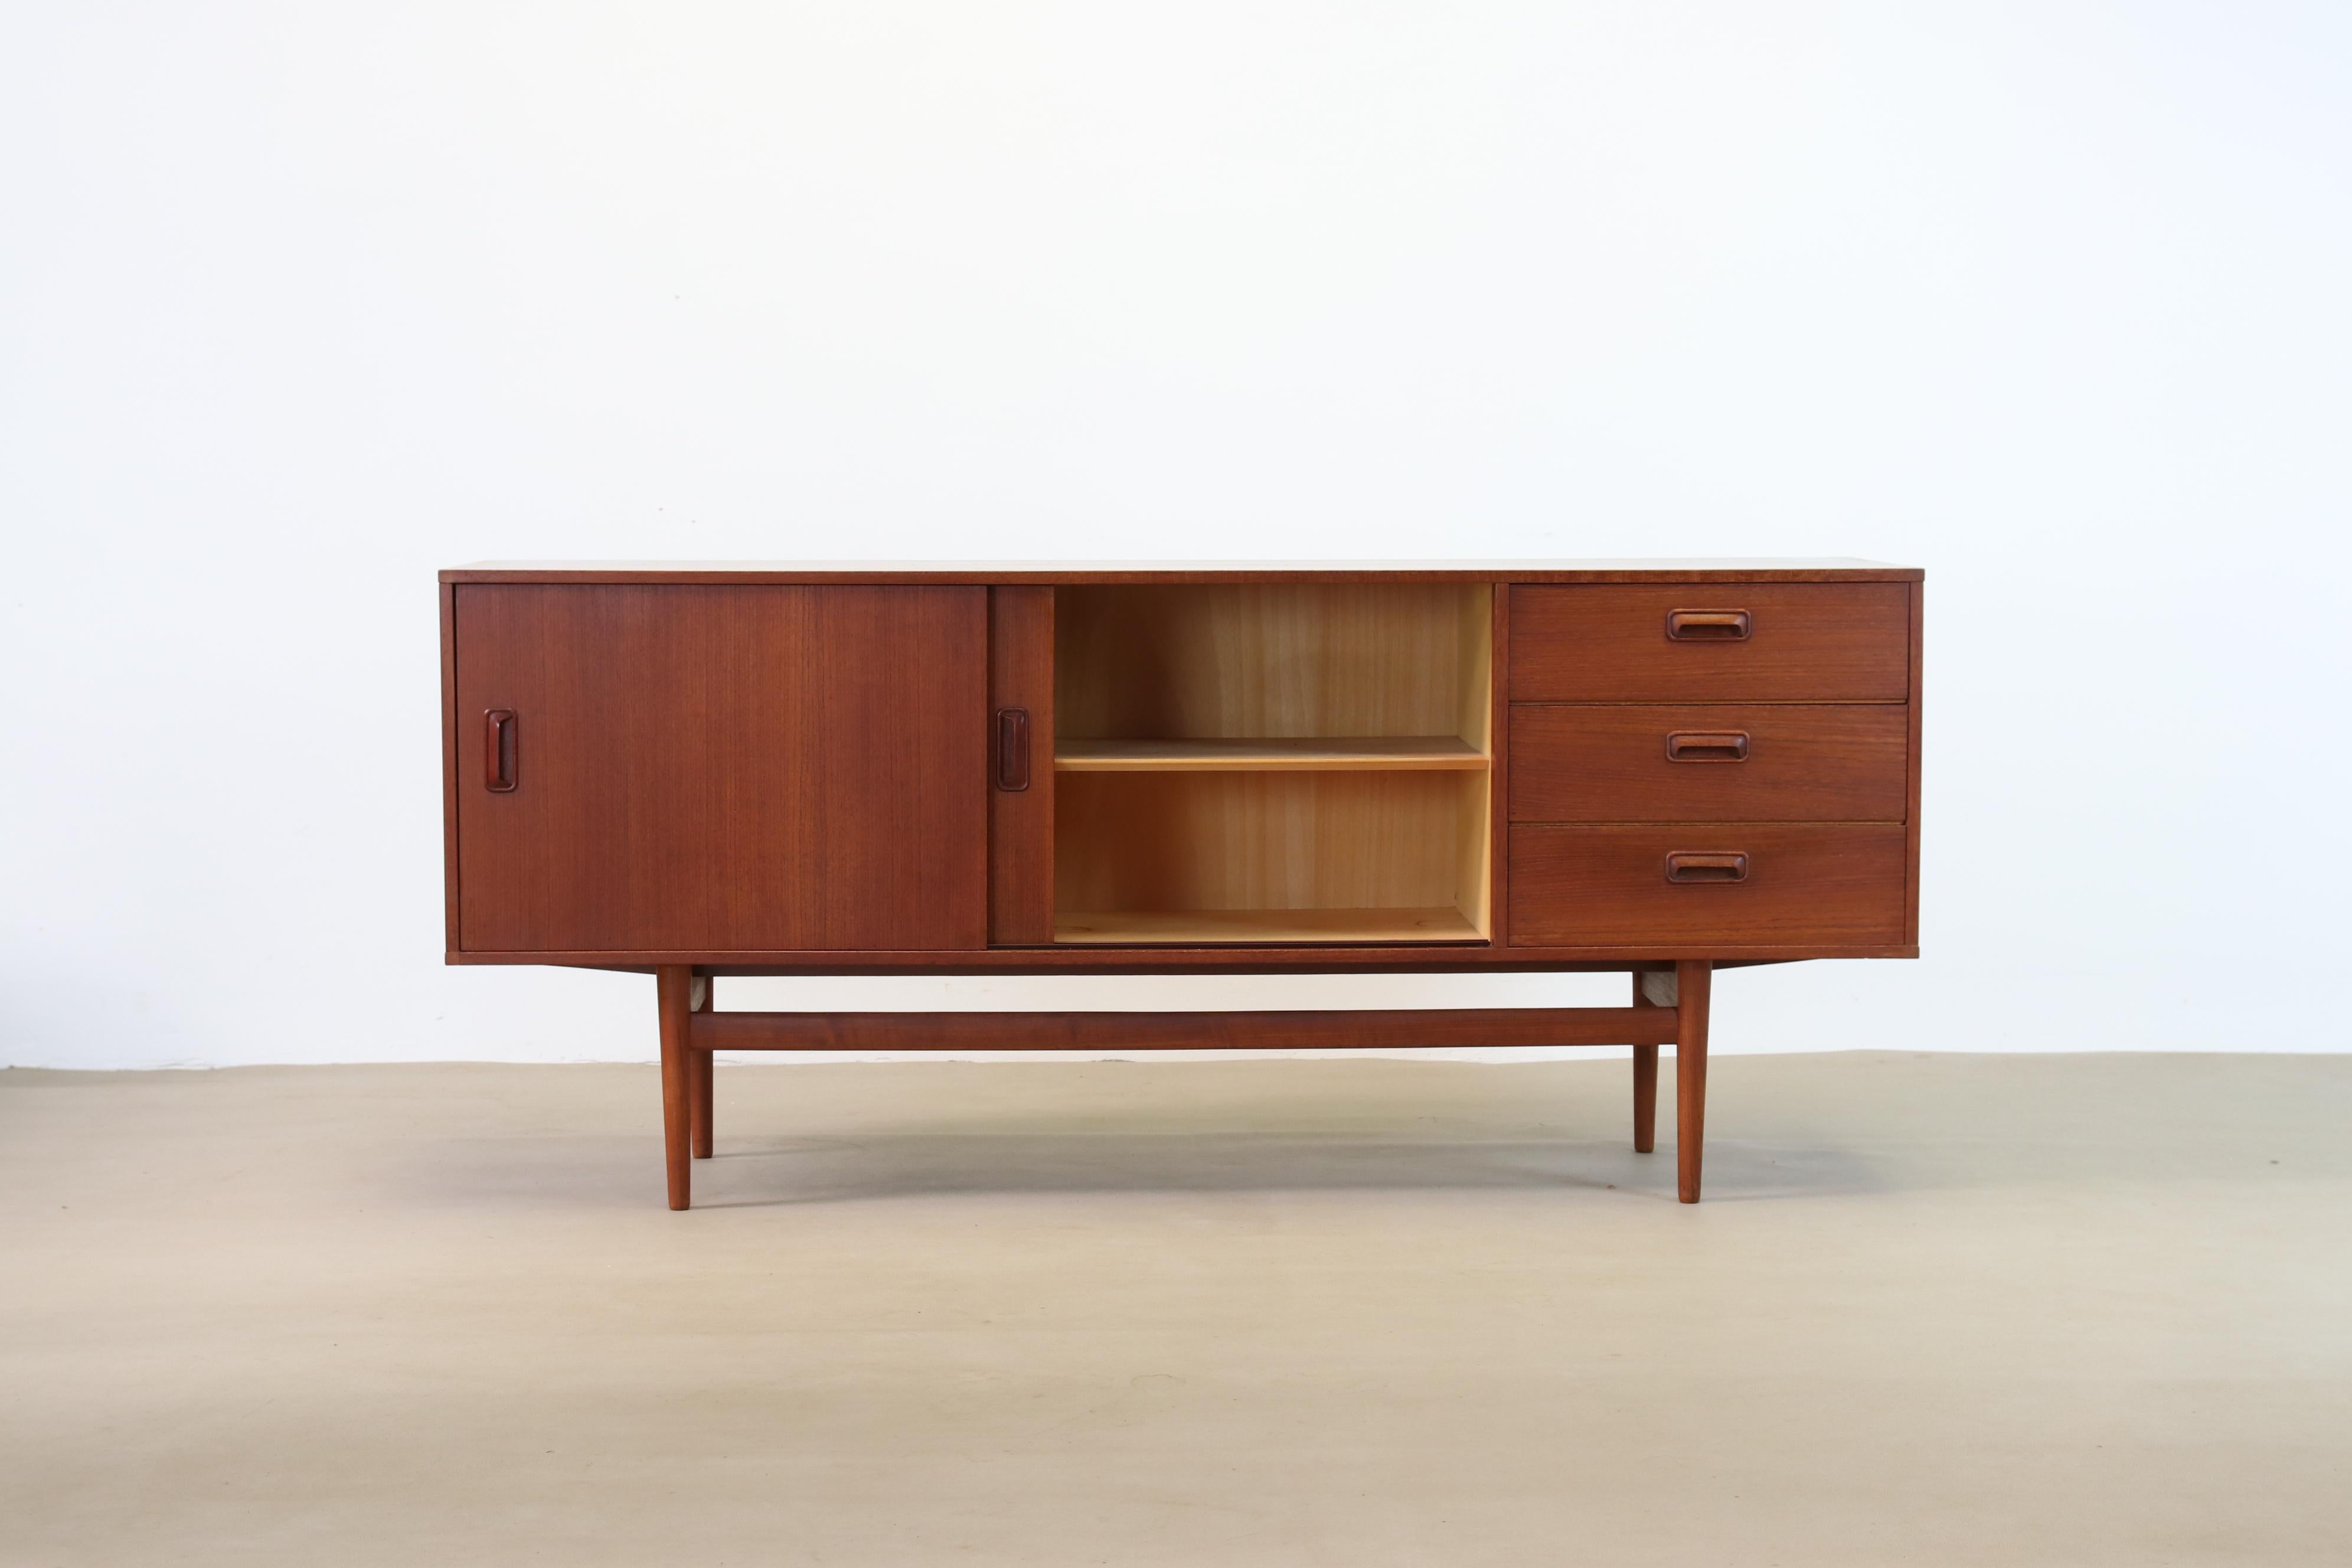 Beautiful sideboard from the German manufacturer Musterring Mobel from the 1960s. Made of teak and designed in the Danish style. The sideboard stands on high slender legs, which makes this sideboard look light, but still has a lot of storage space